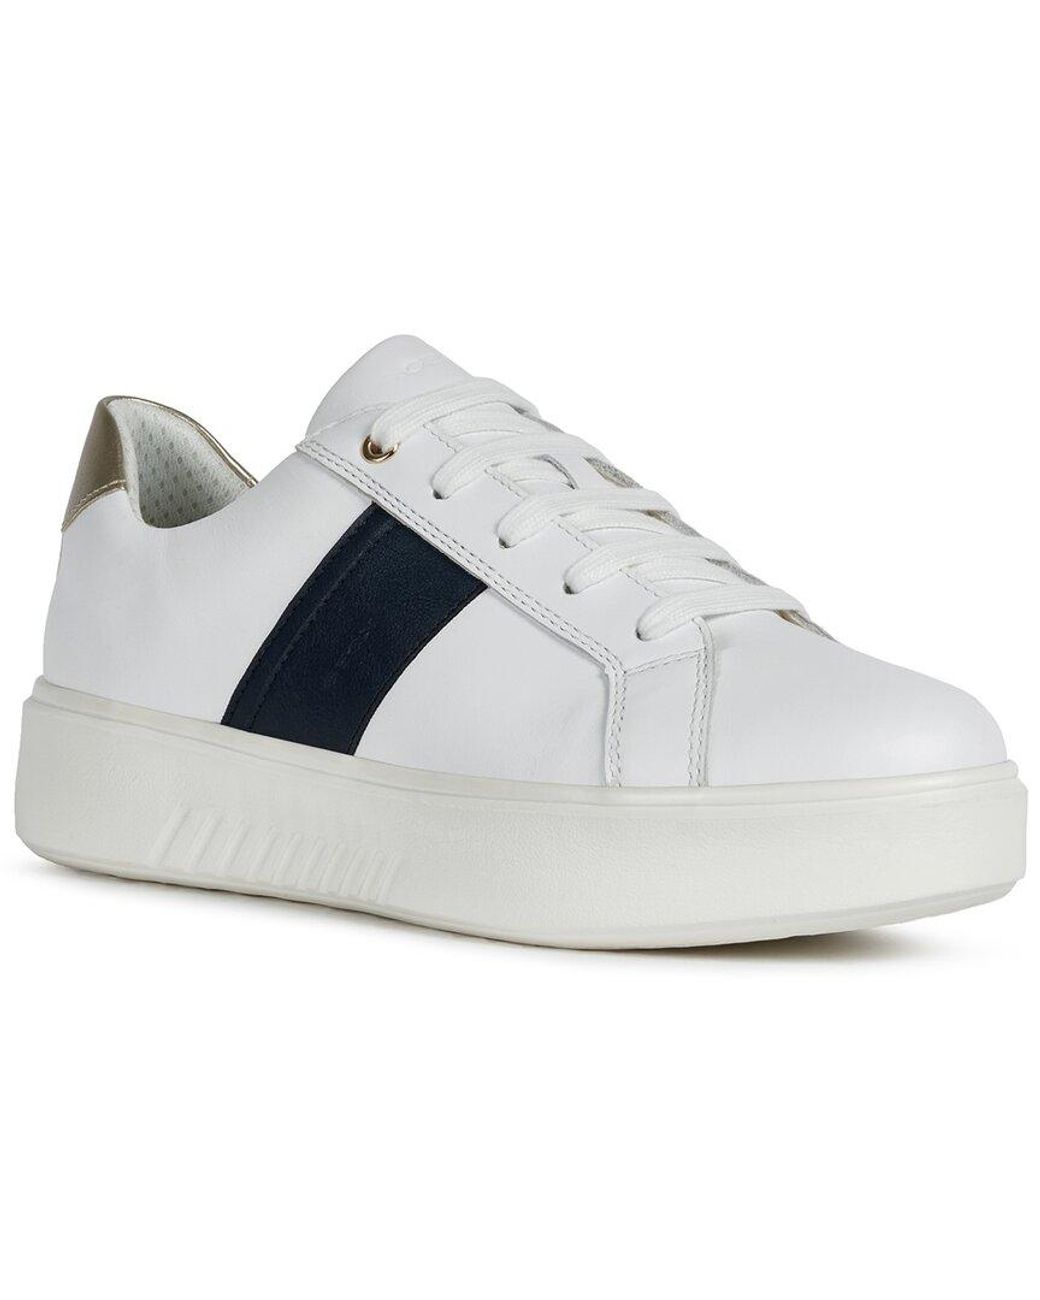 speech Journey Circumference Geox Nhenbus Leather Sneaker in White | Lyst